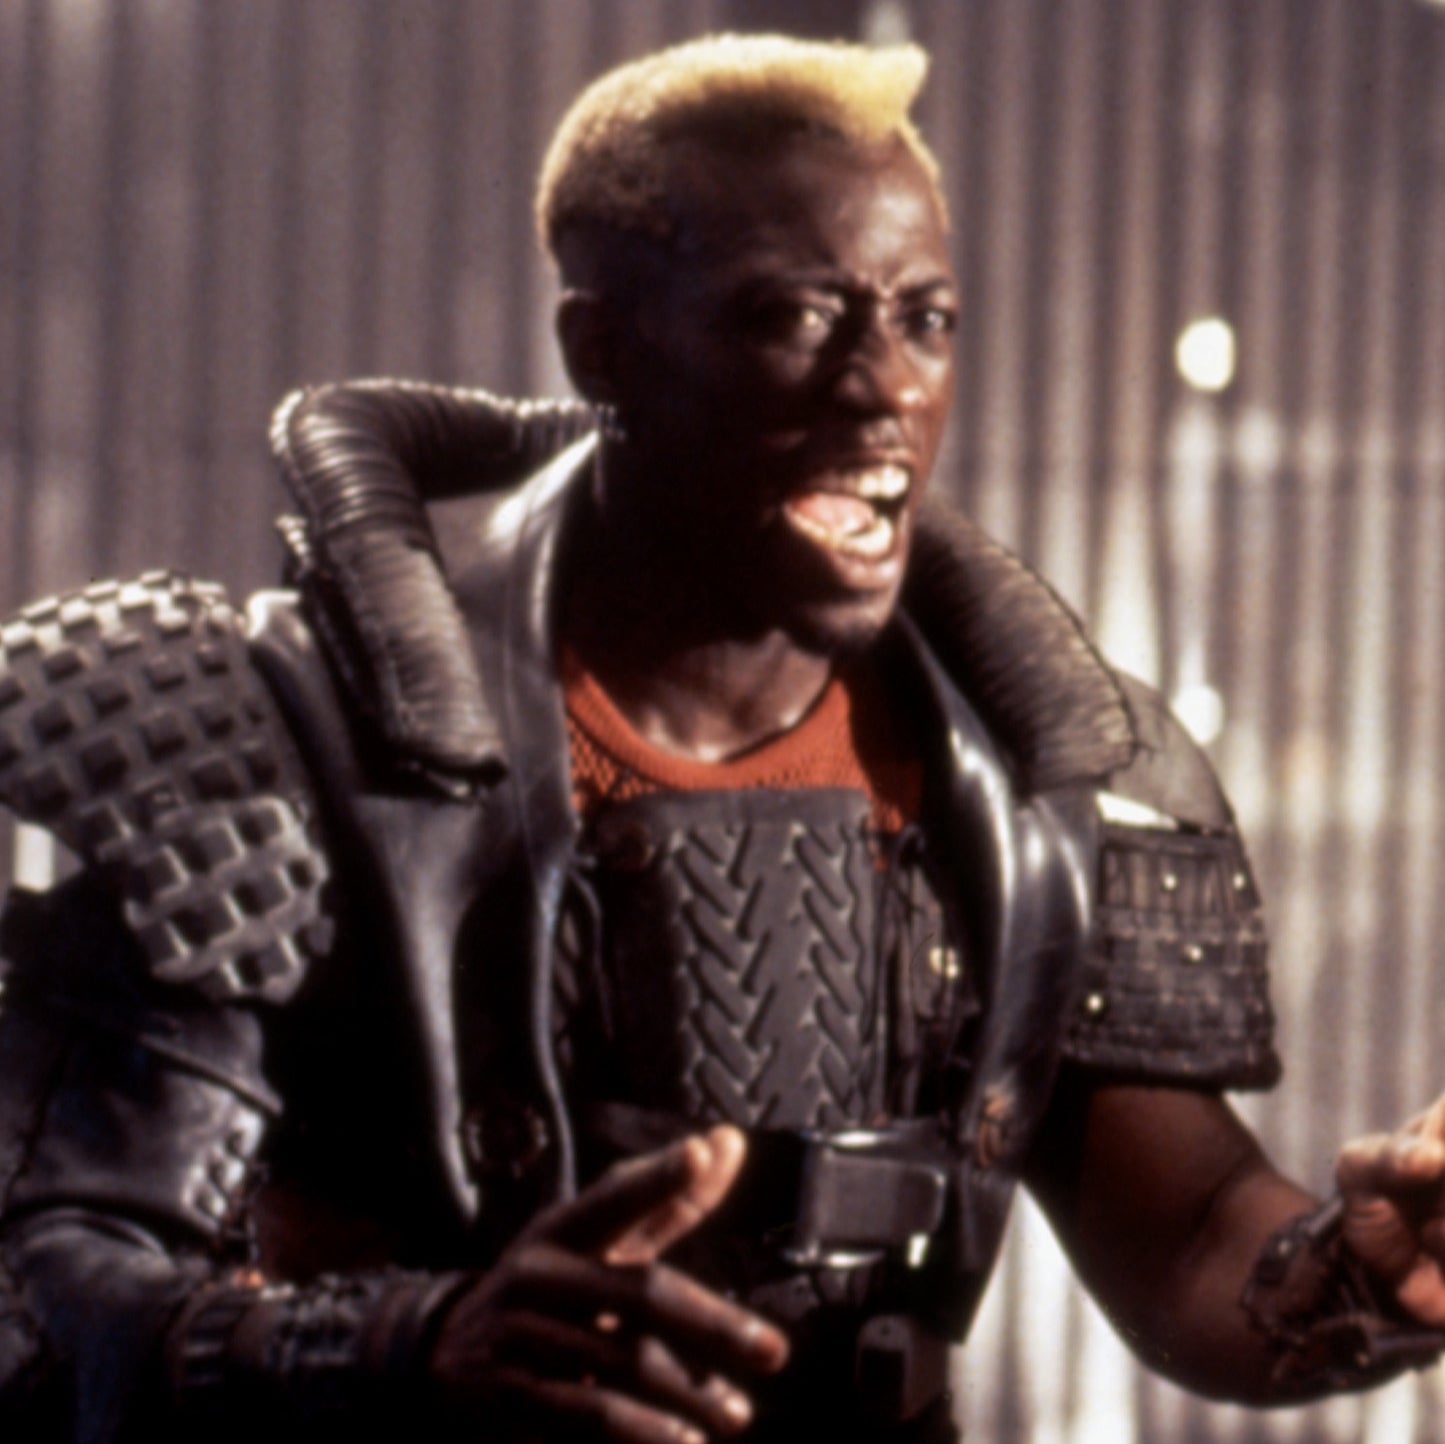 Wesley Snipes dressed in gear from the future screaming